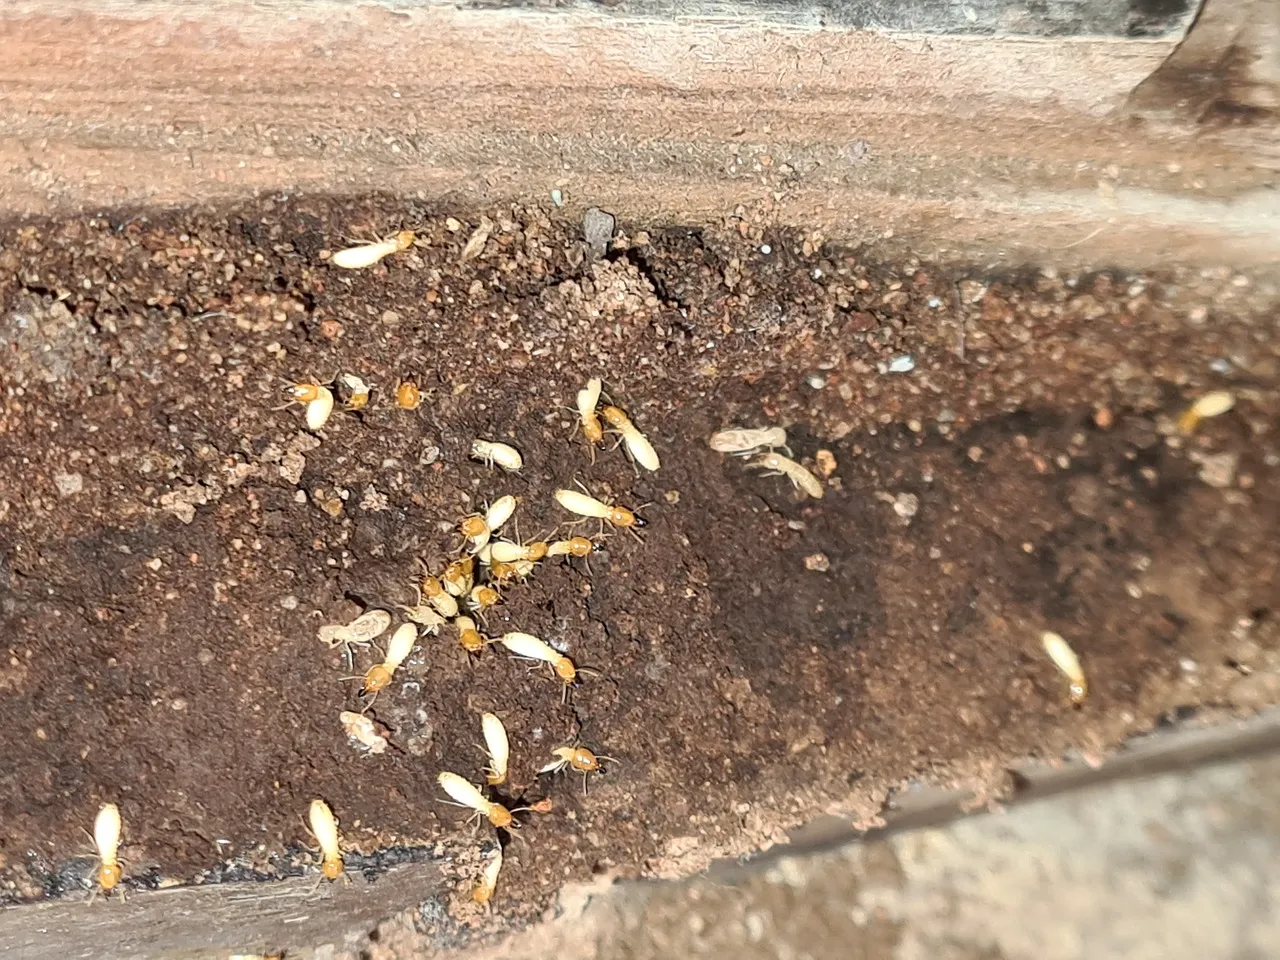 Termites infesting wood, highlighting the importance of professional Winter Park termite control services to prevent structural damage to homes.